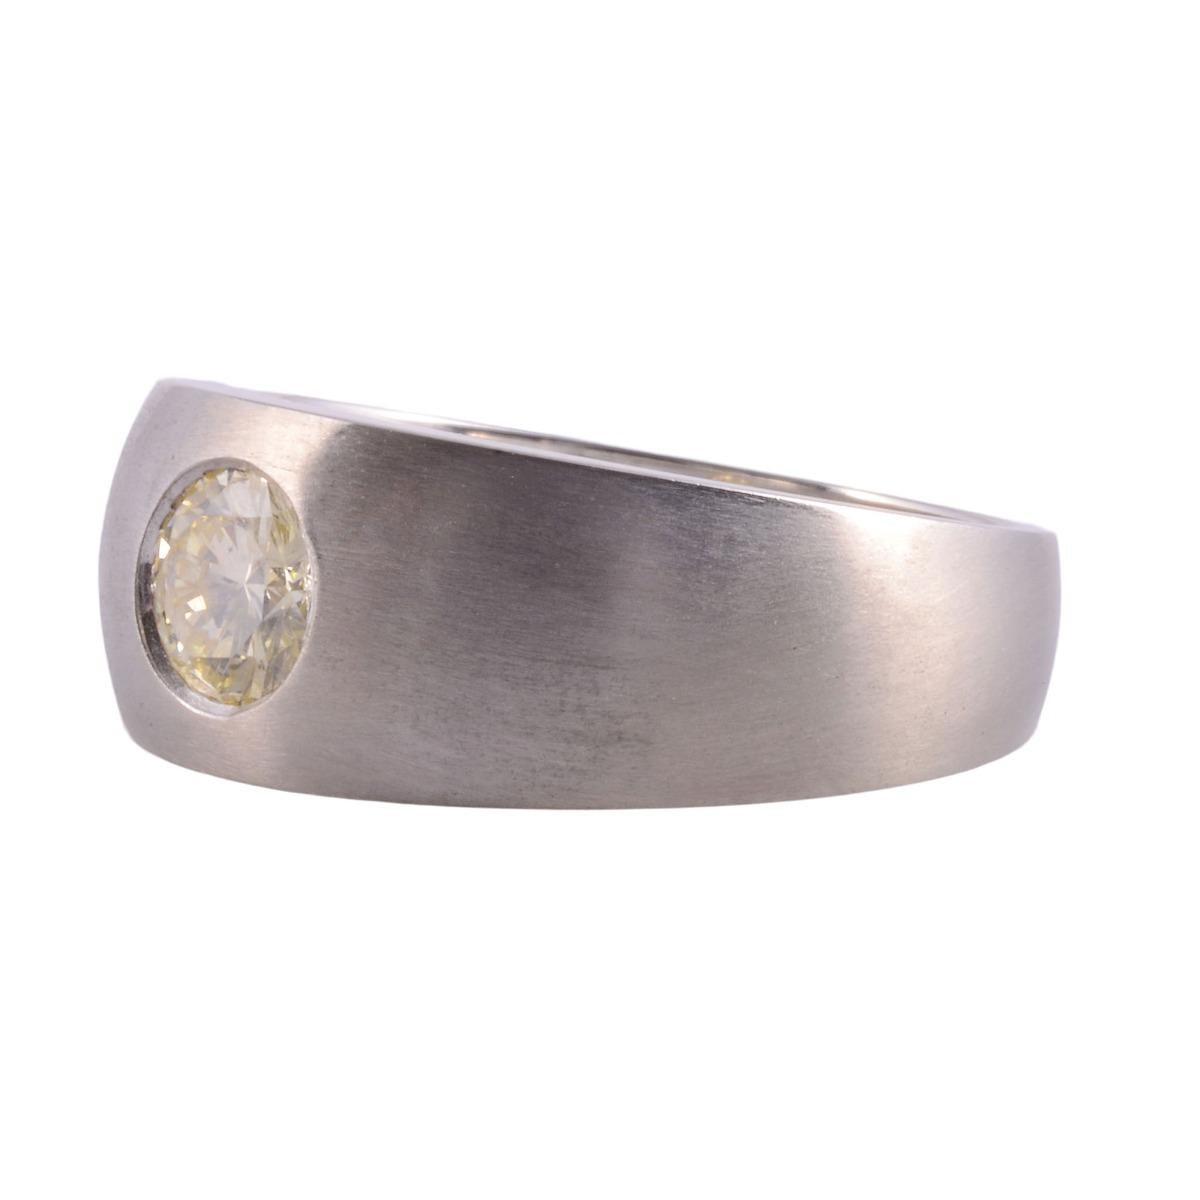 Estate flush set diamond ring. This 14 karat white gold ring features a flush set .80 carat round brilliant diamond. The diamond has SI1 clarity and is light yellow in color. This white gold diamond ring is appraised at $3,800 and is a size 8.25.